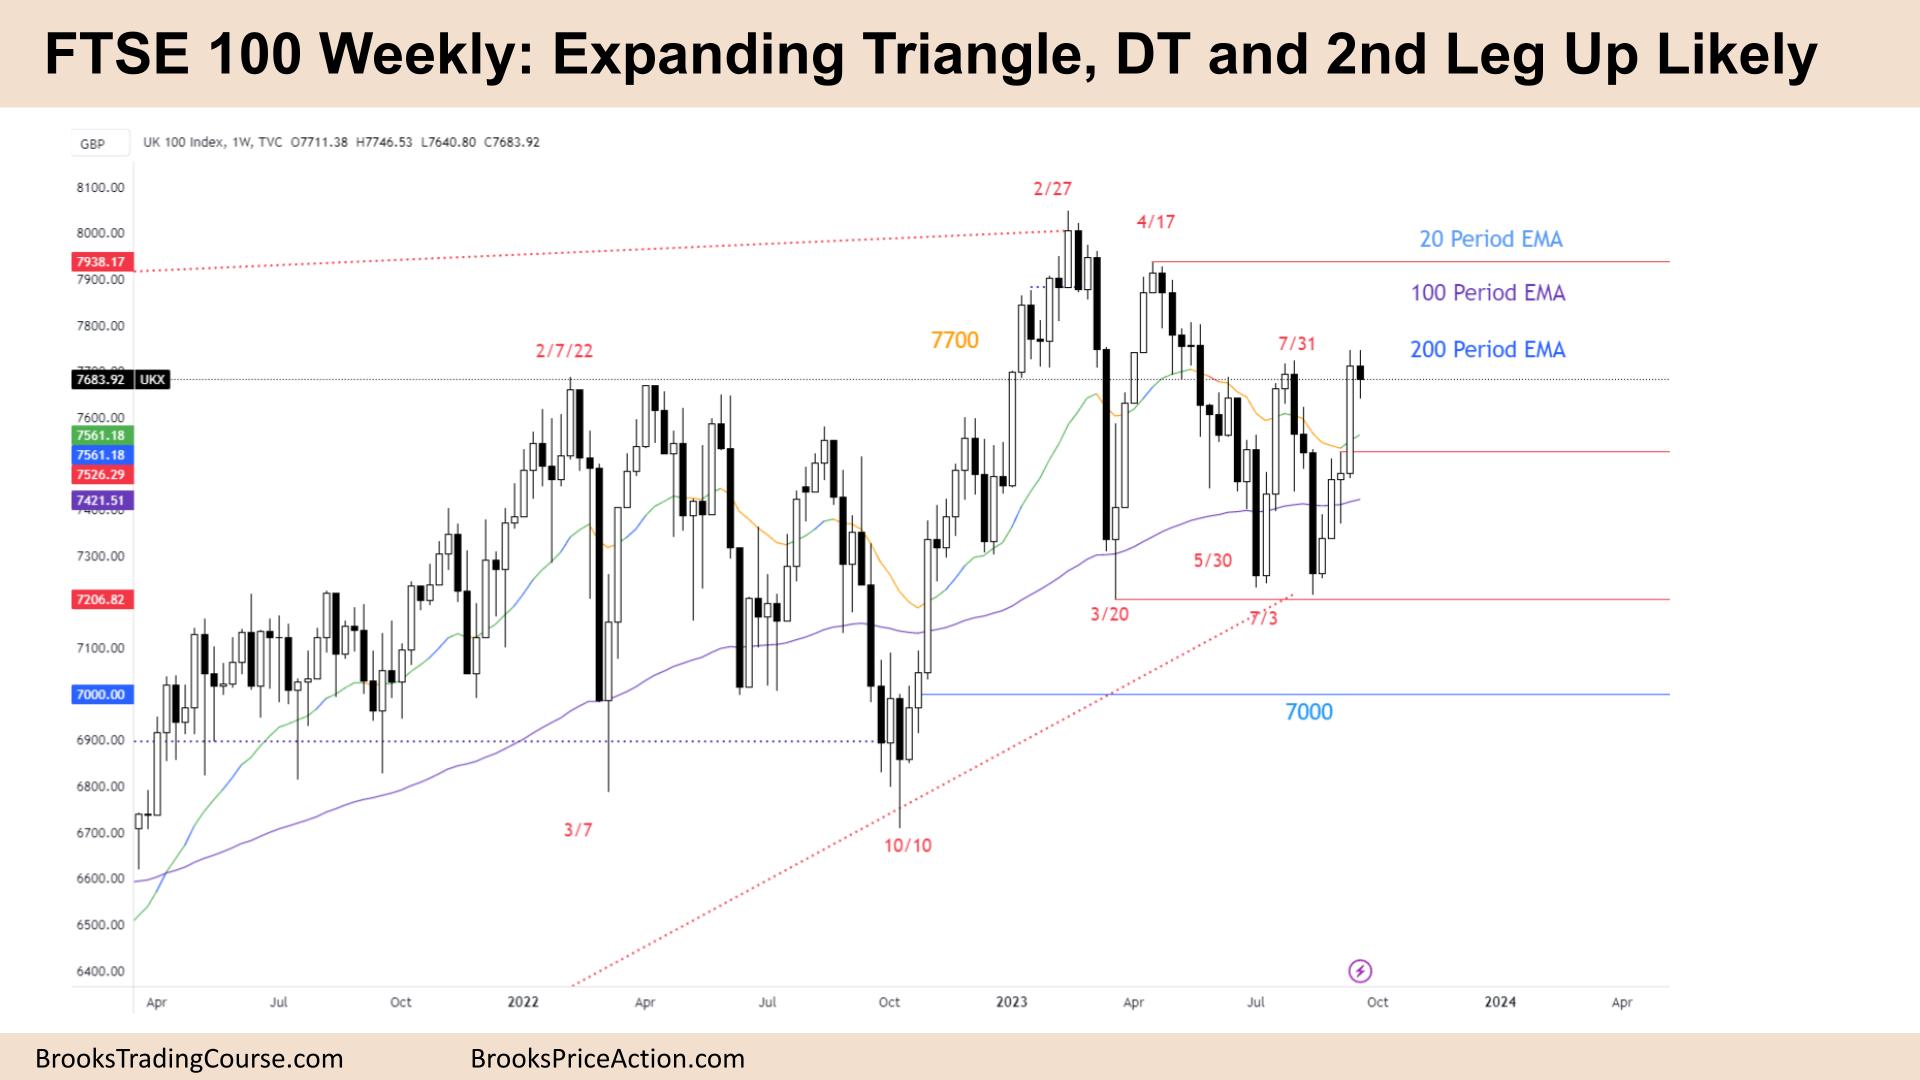 FTSE 100 Expanding Triangle, DT and 2nd Leg Up Likely